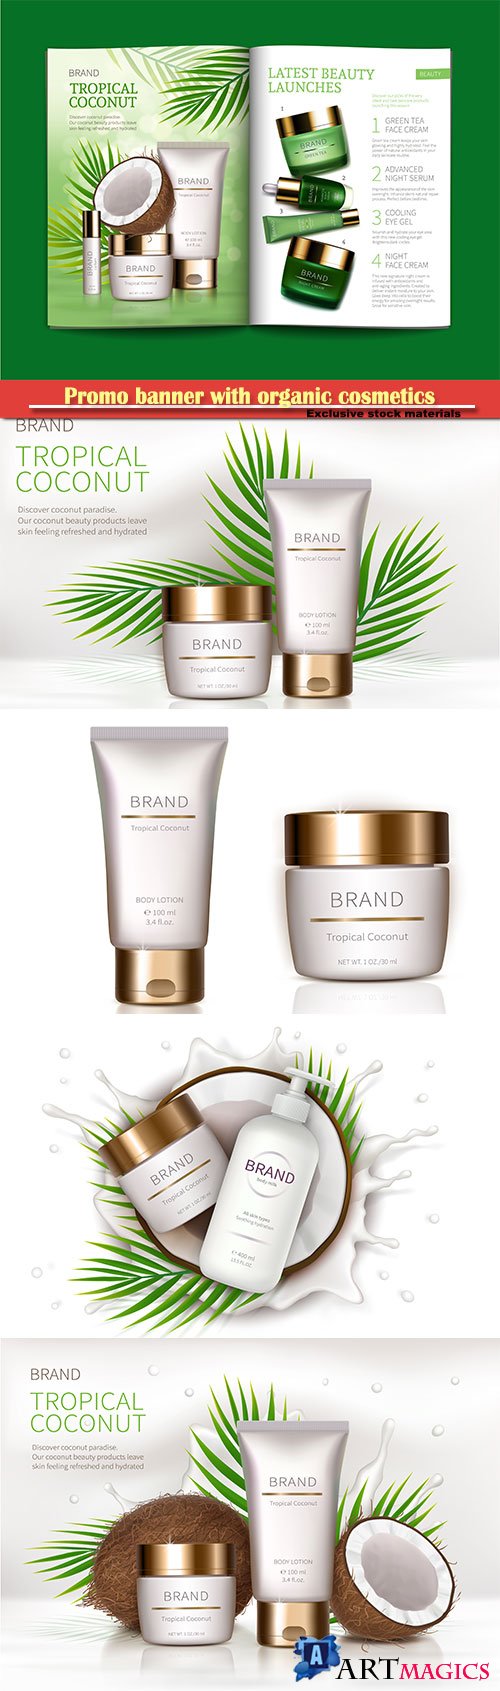 Mock up promo banner with organic cosmetics